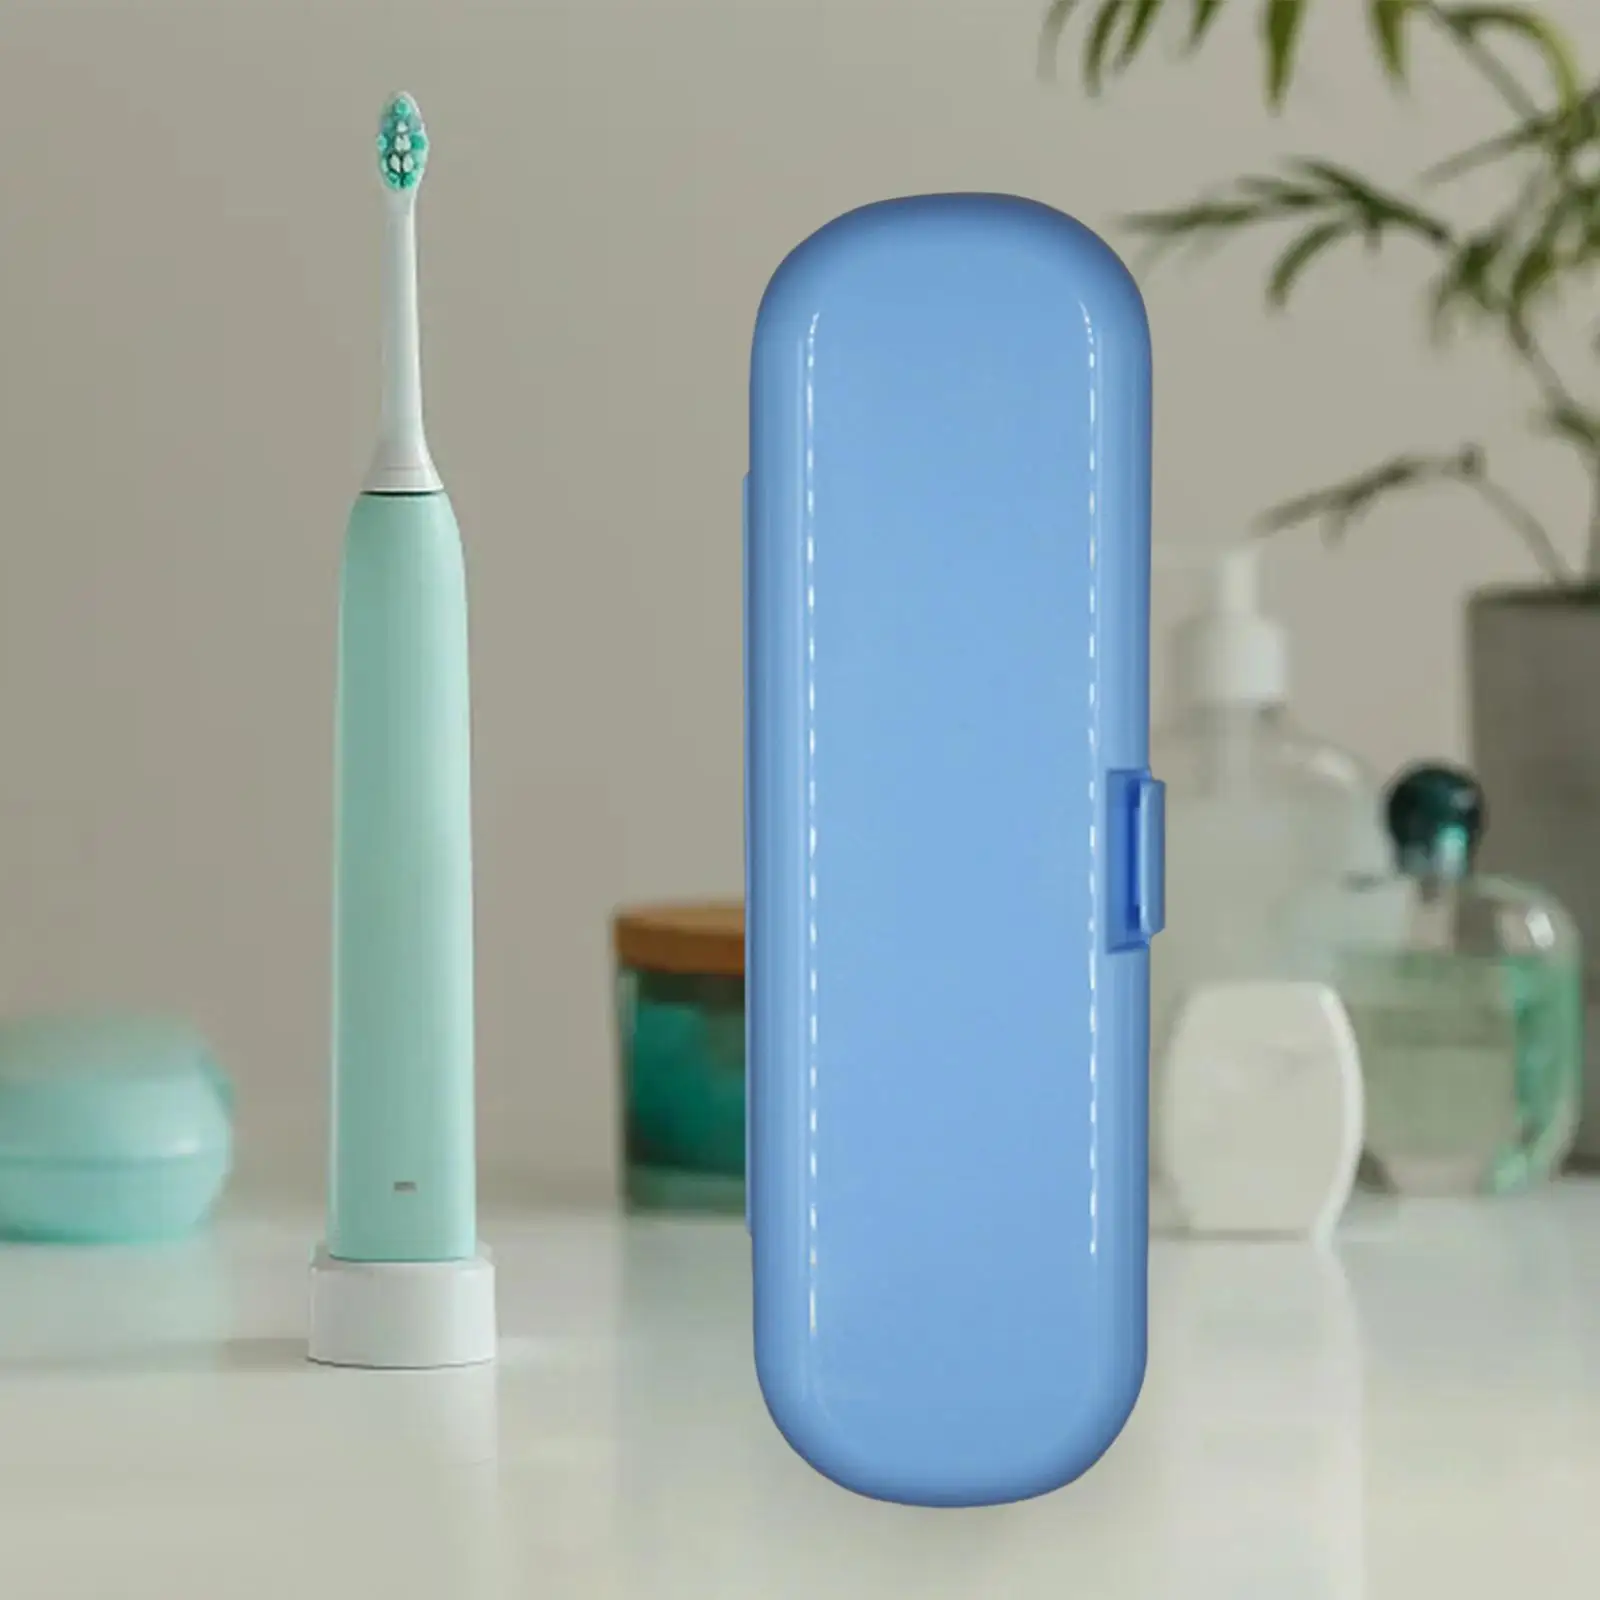 Electric Toothbrush Travel Case Portable Hard Travel Case Electric Toothbrush Holder Lightweight Protective Cover for Traveling